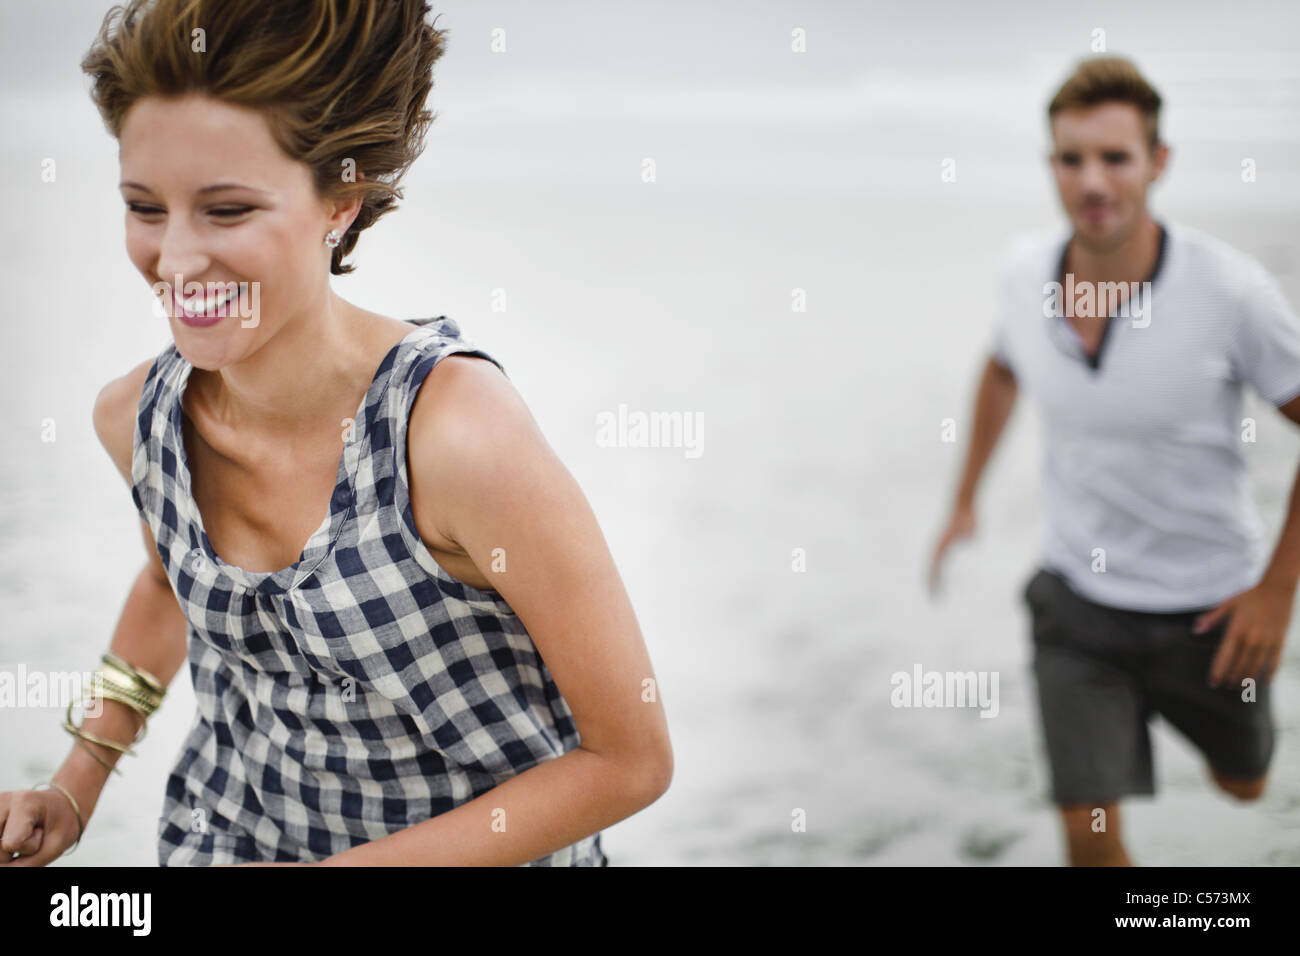 Couple chasing each other on beach Stock Photo